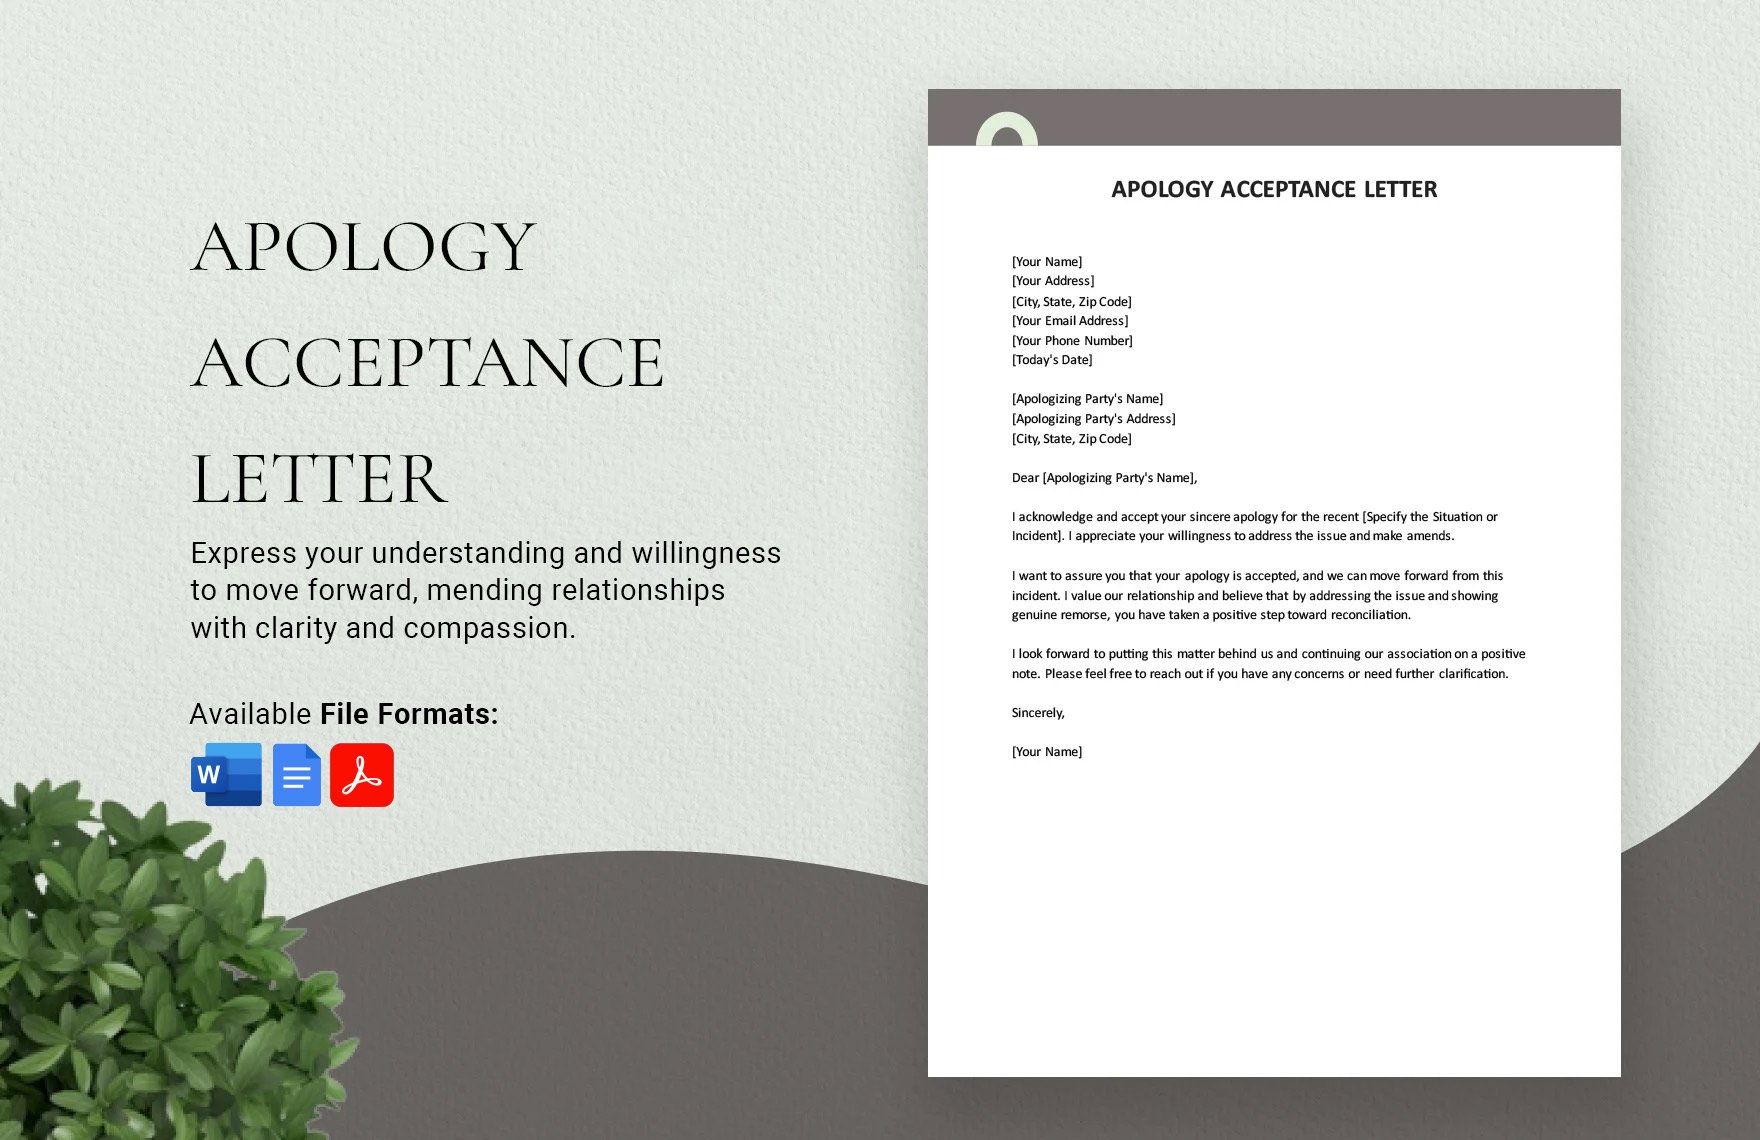 Apology Acceptance Letter in Word, Google Docs, PDF